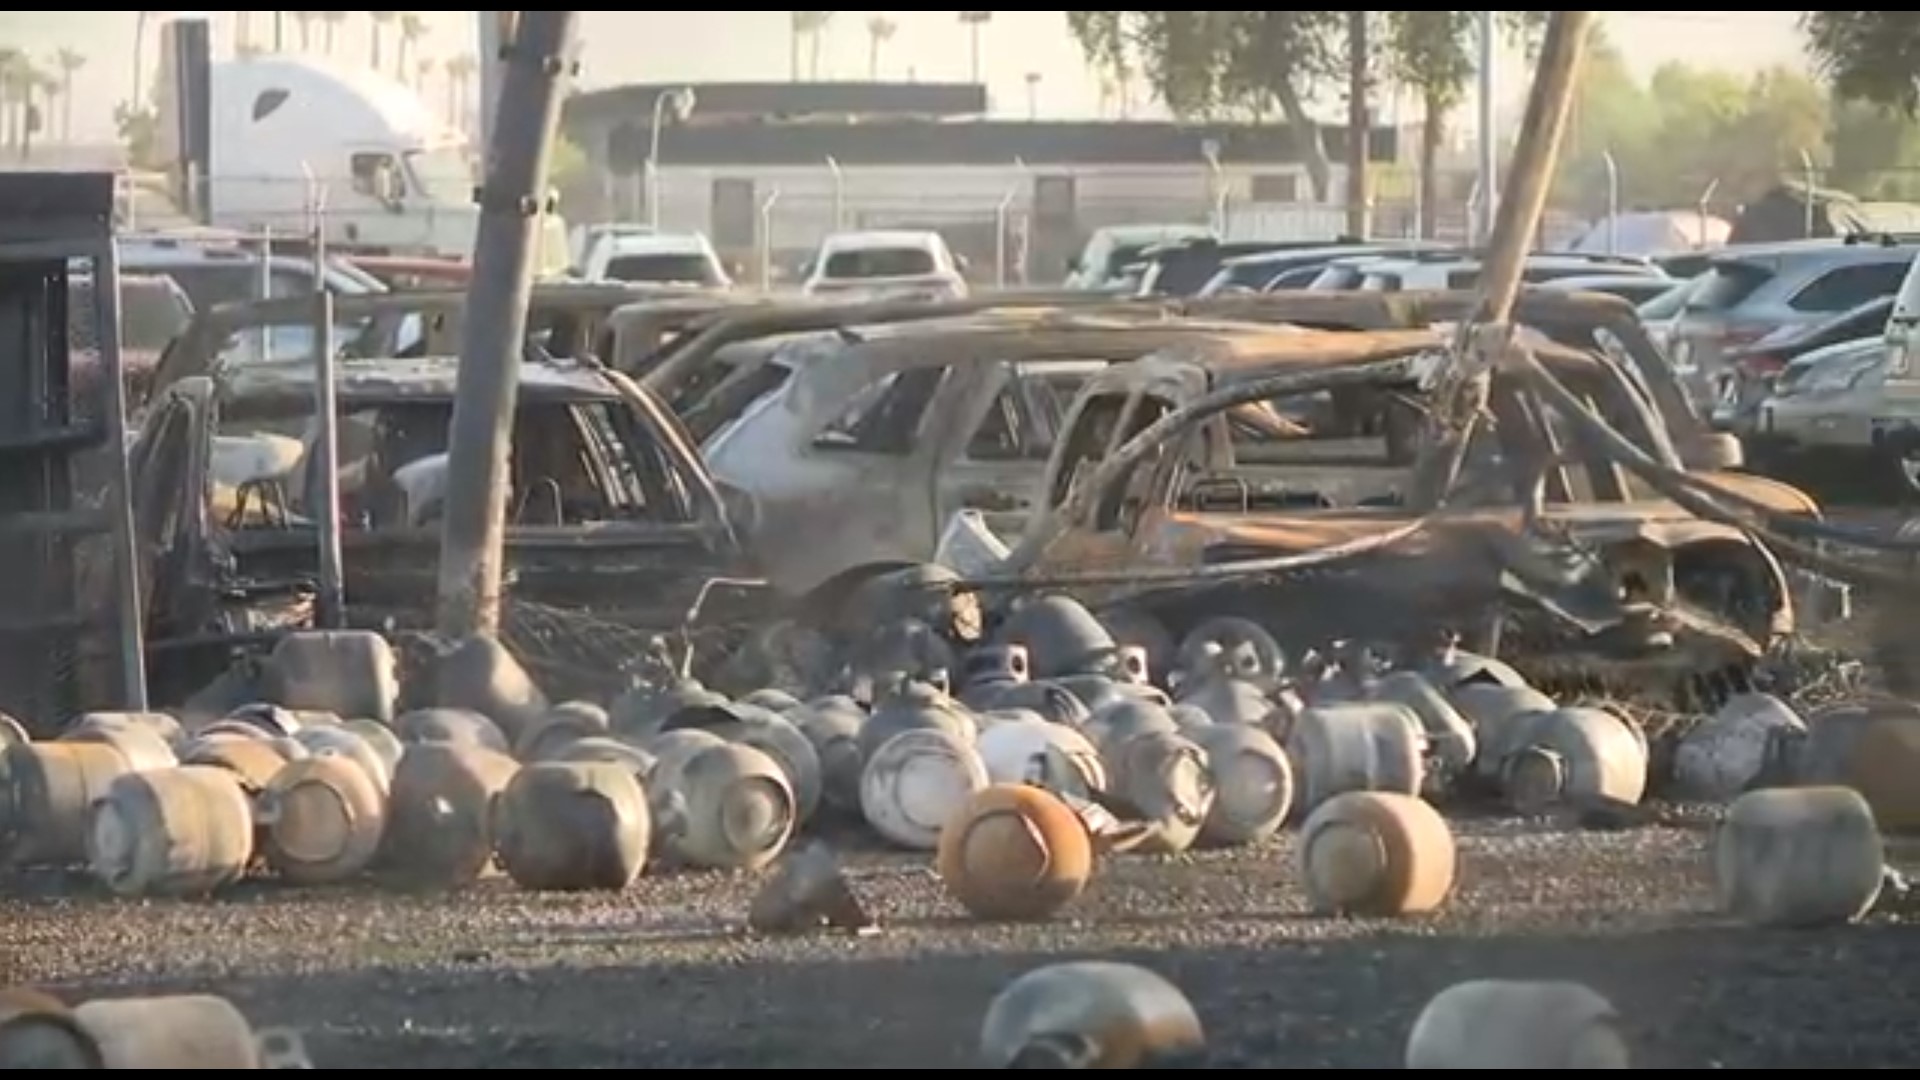 Hundreds of ashed propane tanks now sit at the site of Thursday's fire at a business near 40th and Washington streets.